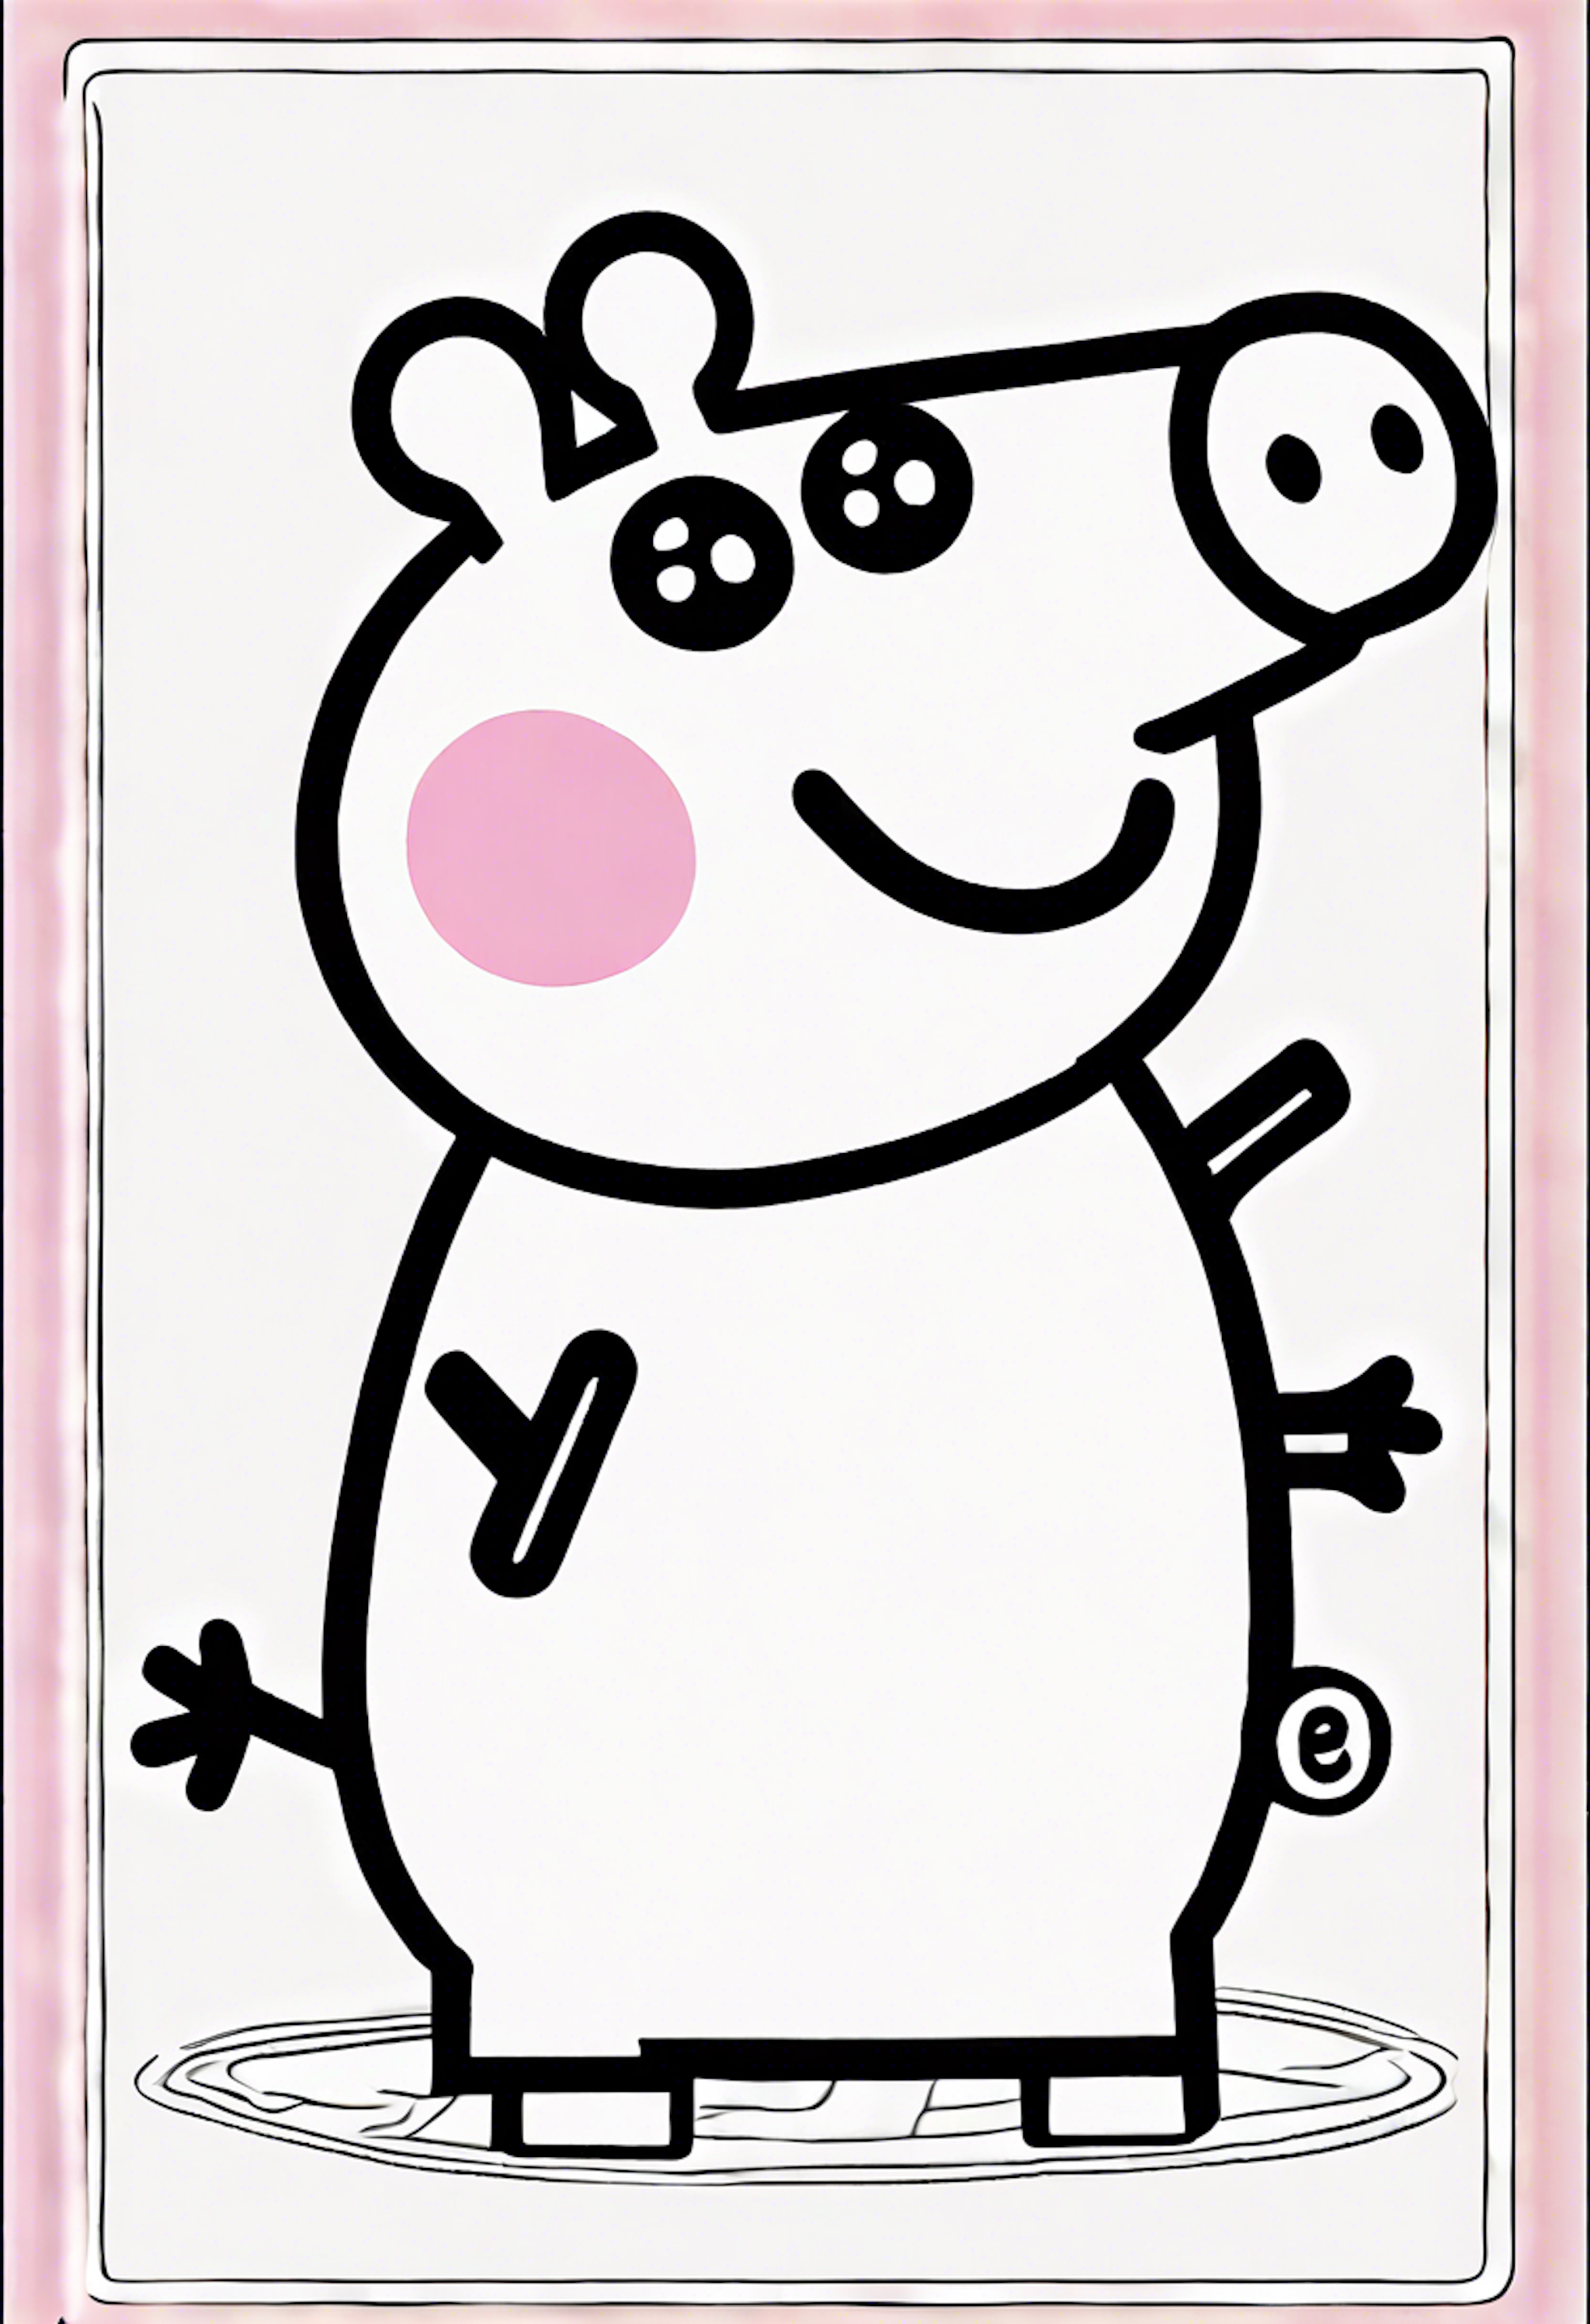 A coloring page for 1 Peppa Pig coloring pages